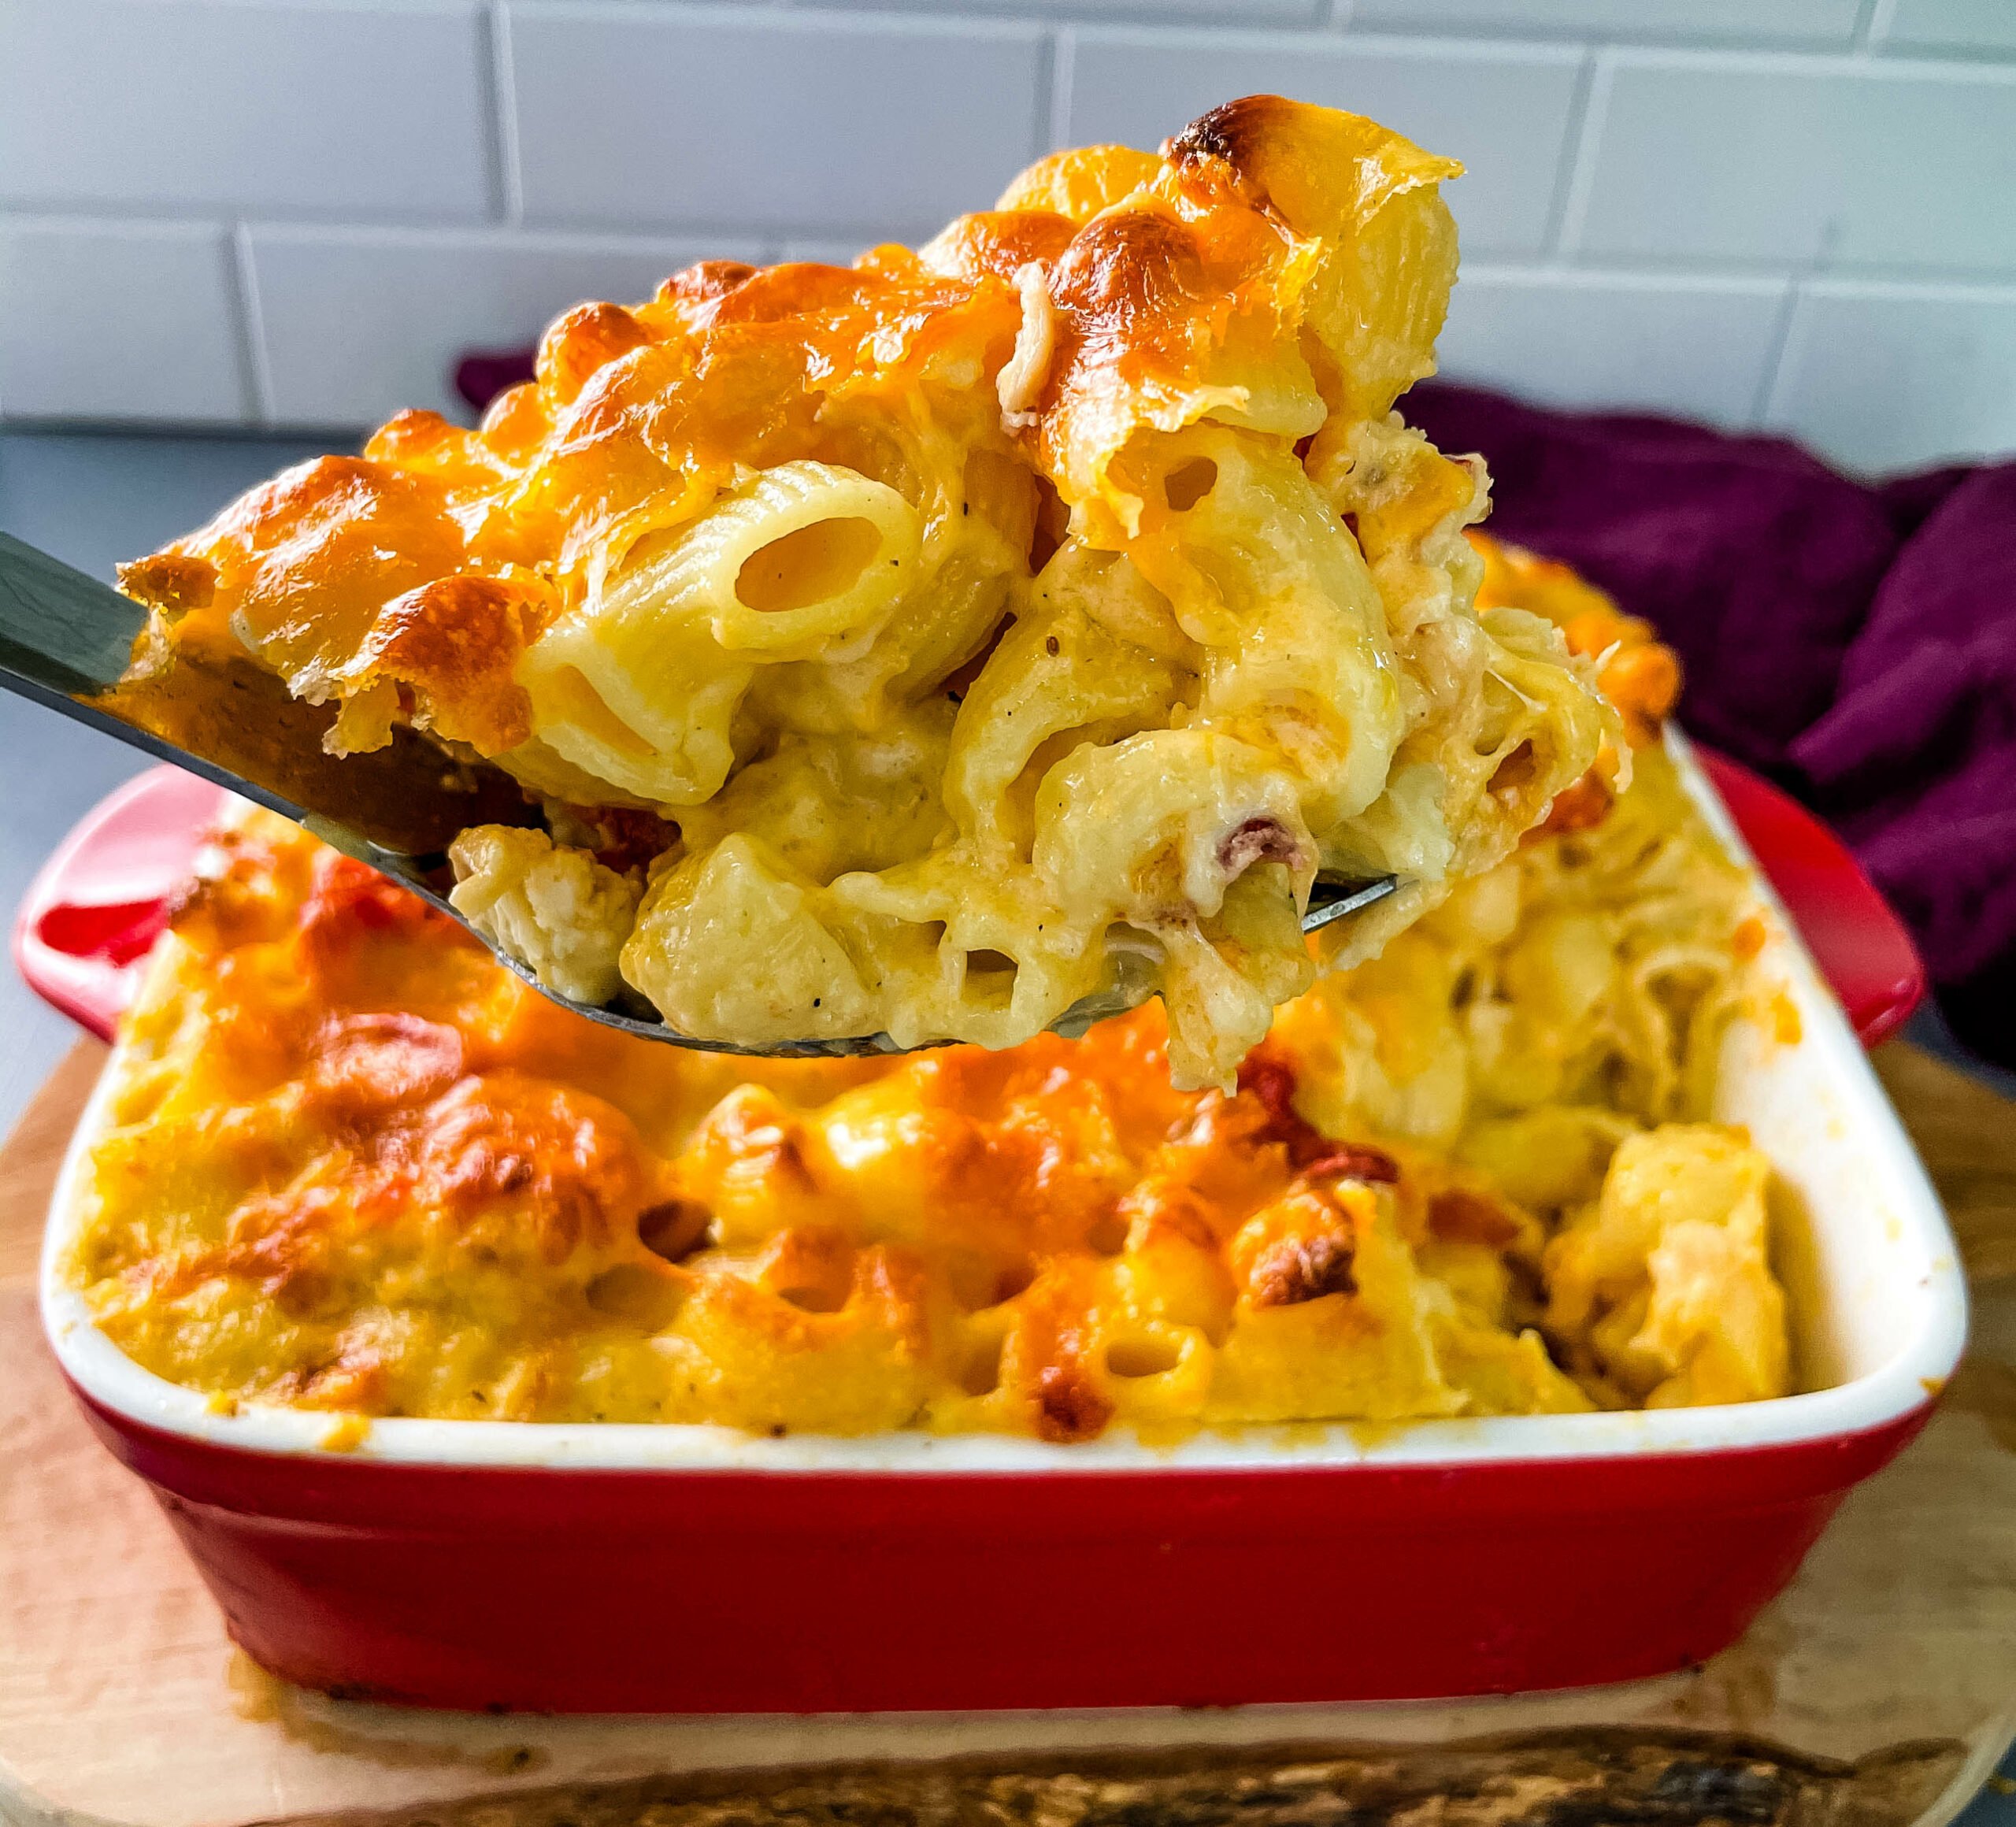 https://www.staysnatched.com/wp-content/uploads/2021/06/lobster-mac-and-cheese-4-1-scaled.jpg